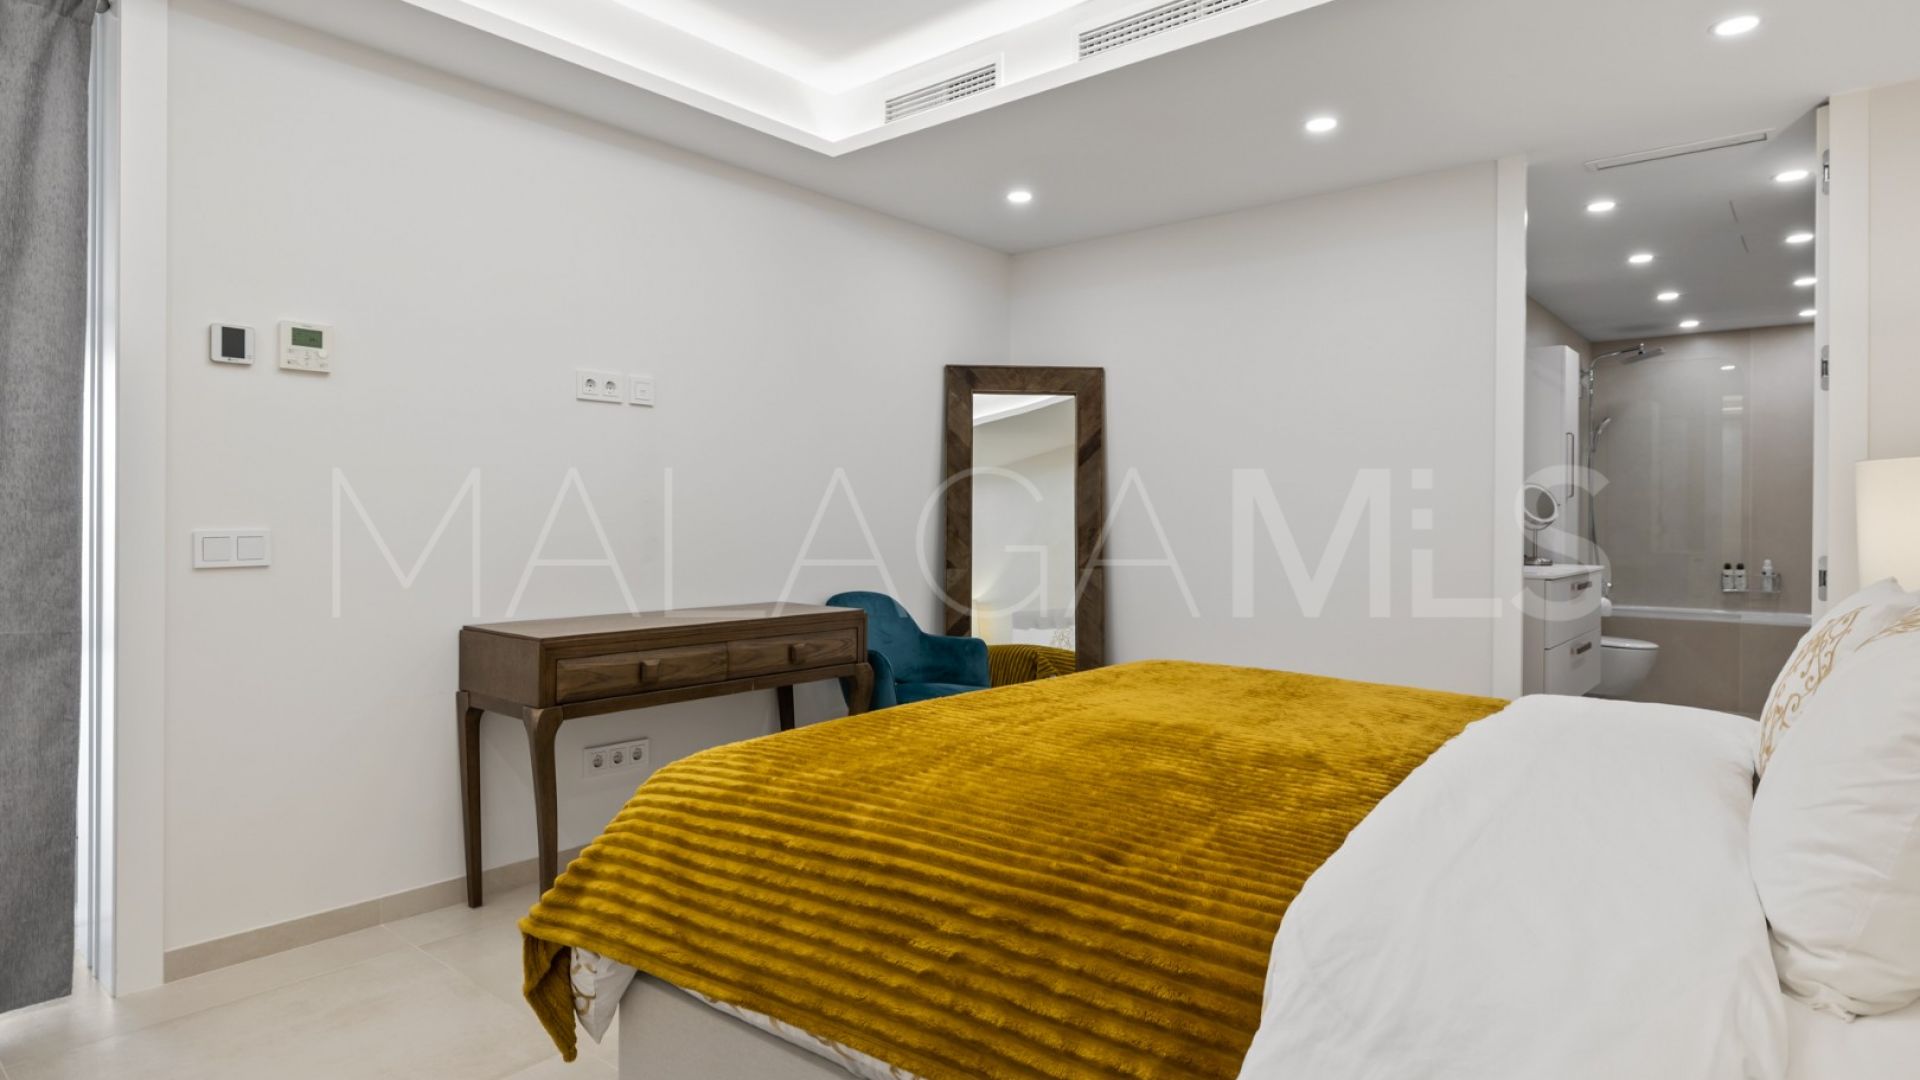 9 Lions Residences apartment for sale